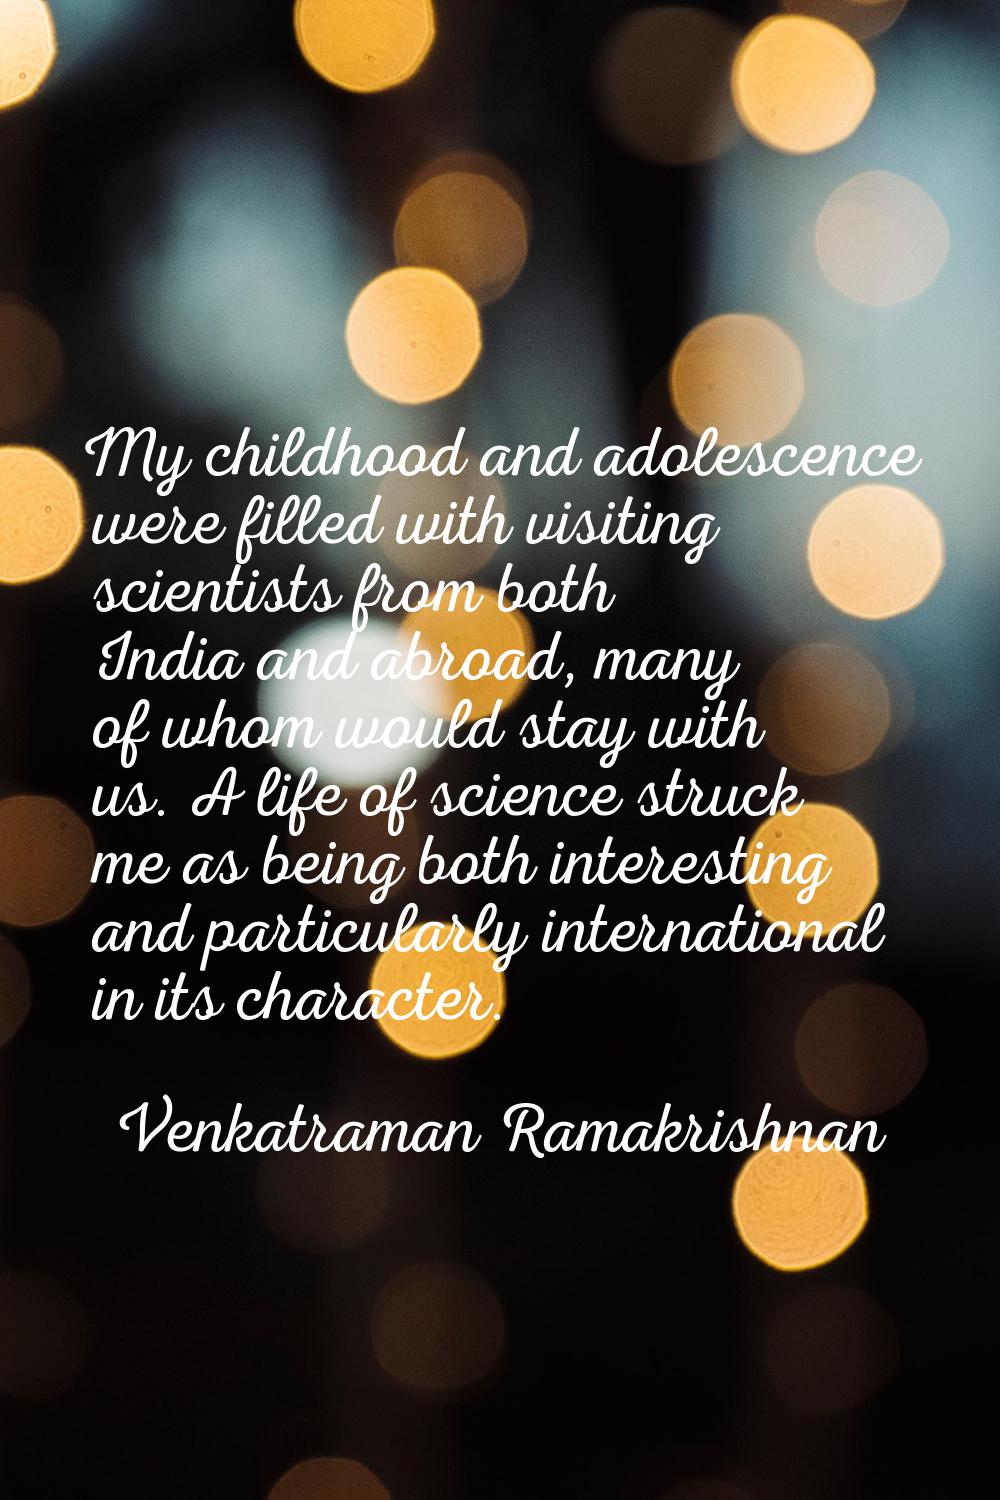 My childhood and adolescence were filled with visiting scientists from both India and abroad, many 